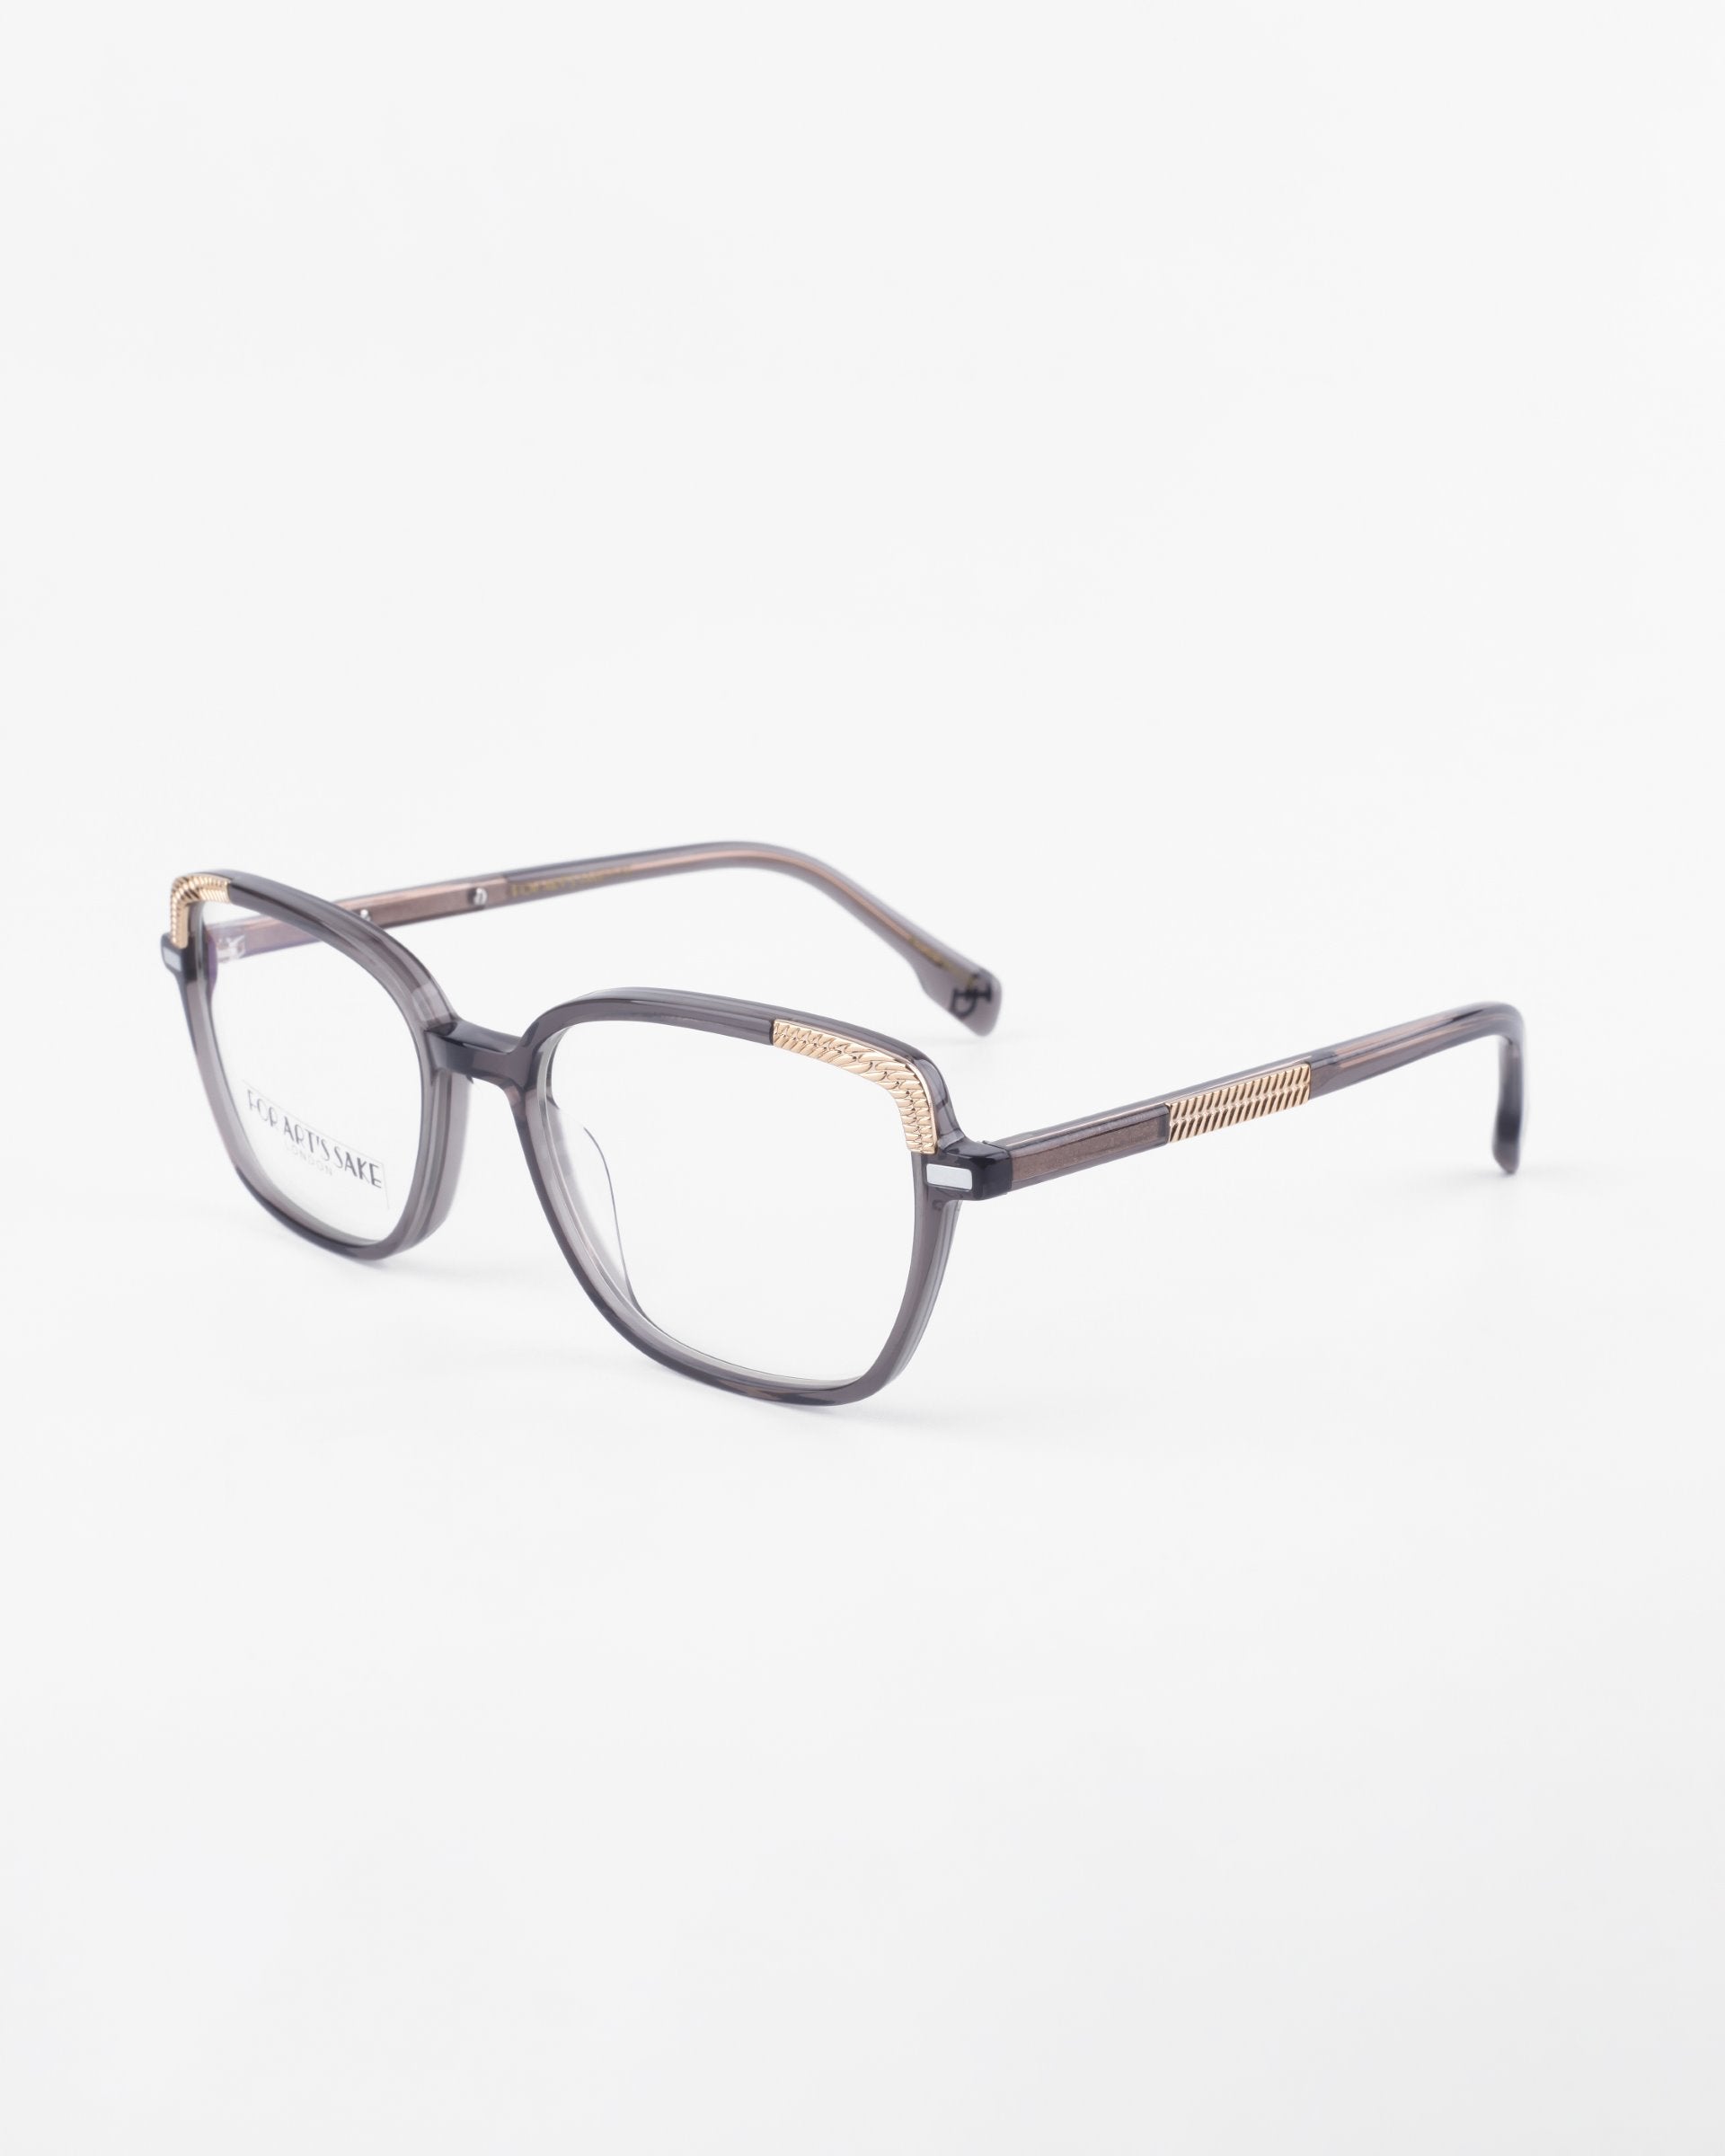 A pair of For Art&#39;s Sake® Mimosa eyeglasses with sleek dark frames and 18-karat gold-plated accents along the temples. The design is modern with a subtle elegance, ideal for both professional and casual wear. Featuring clear lenses with a blue light filter, the overall style is contemporary.